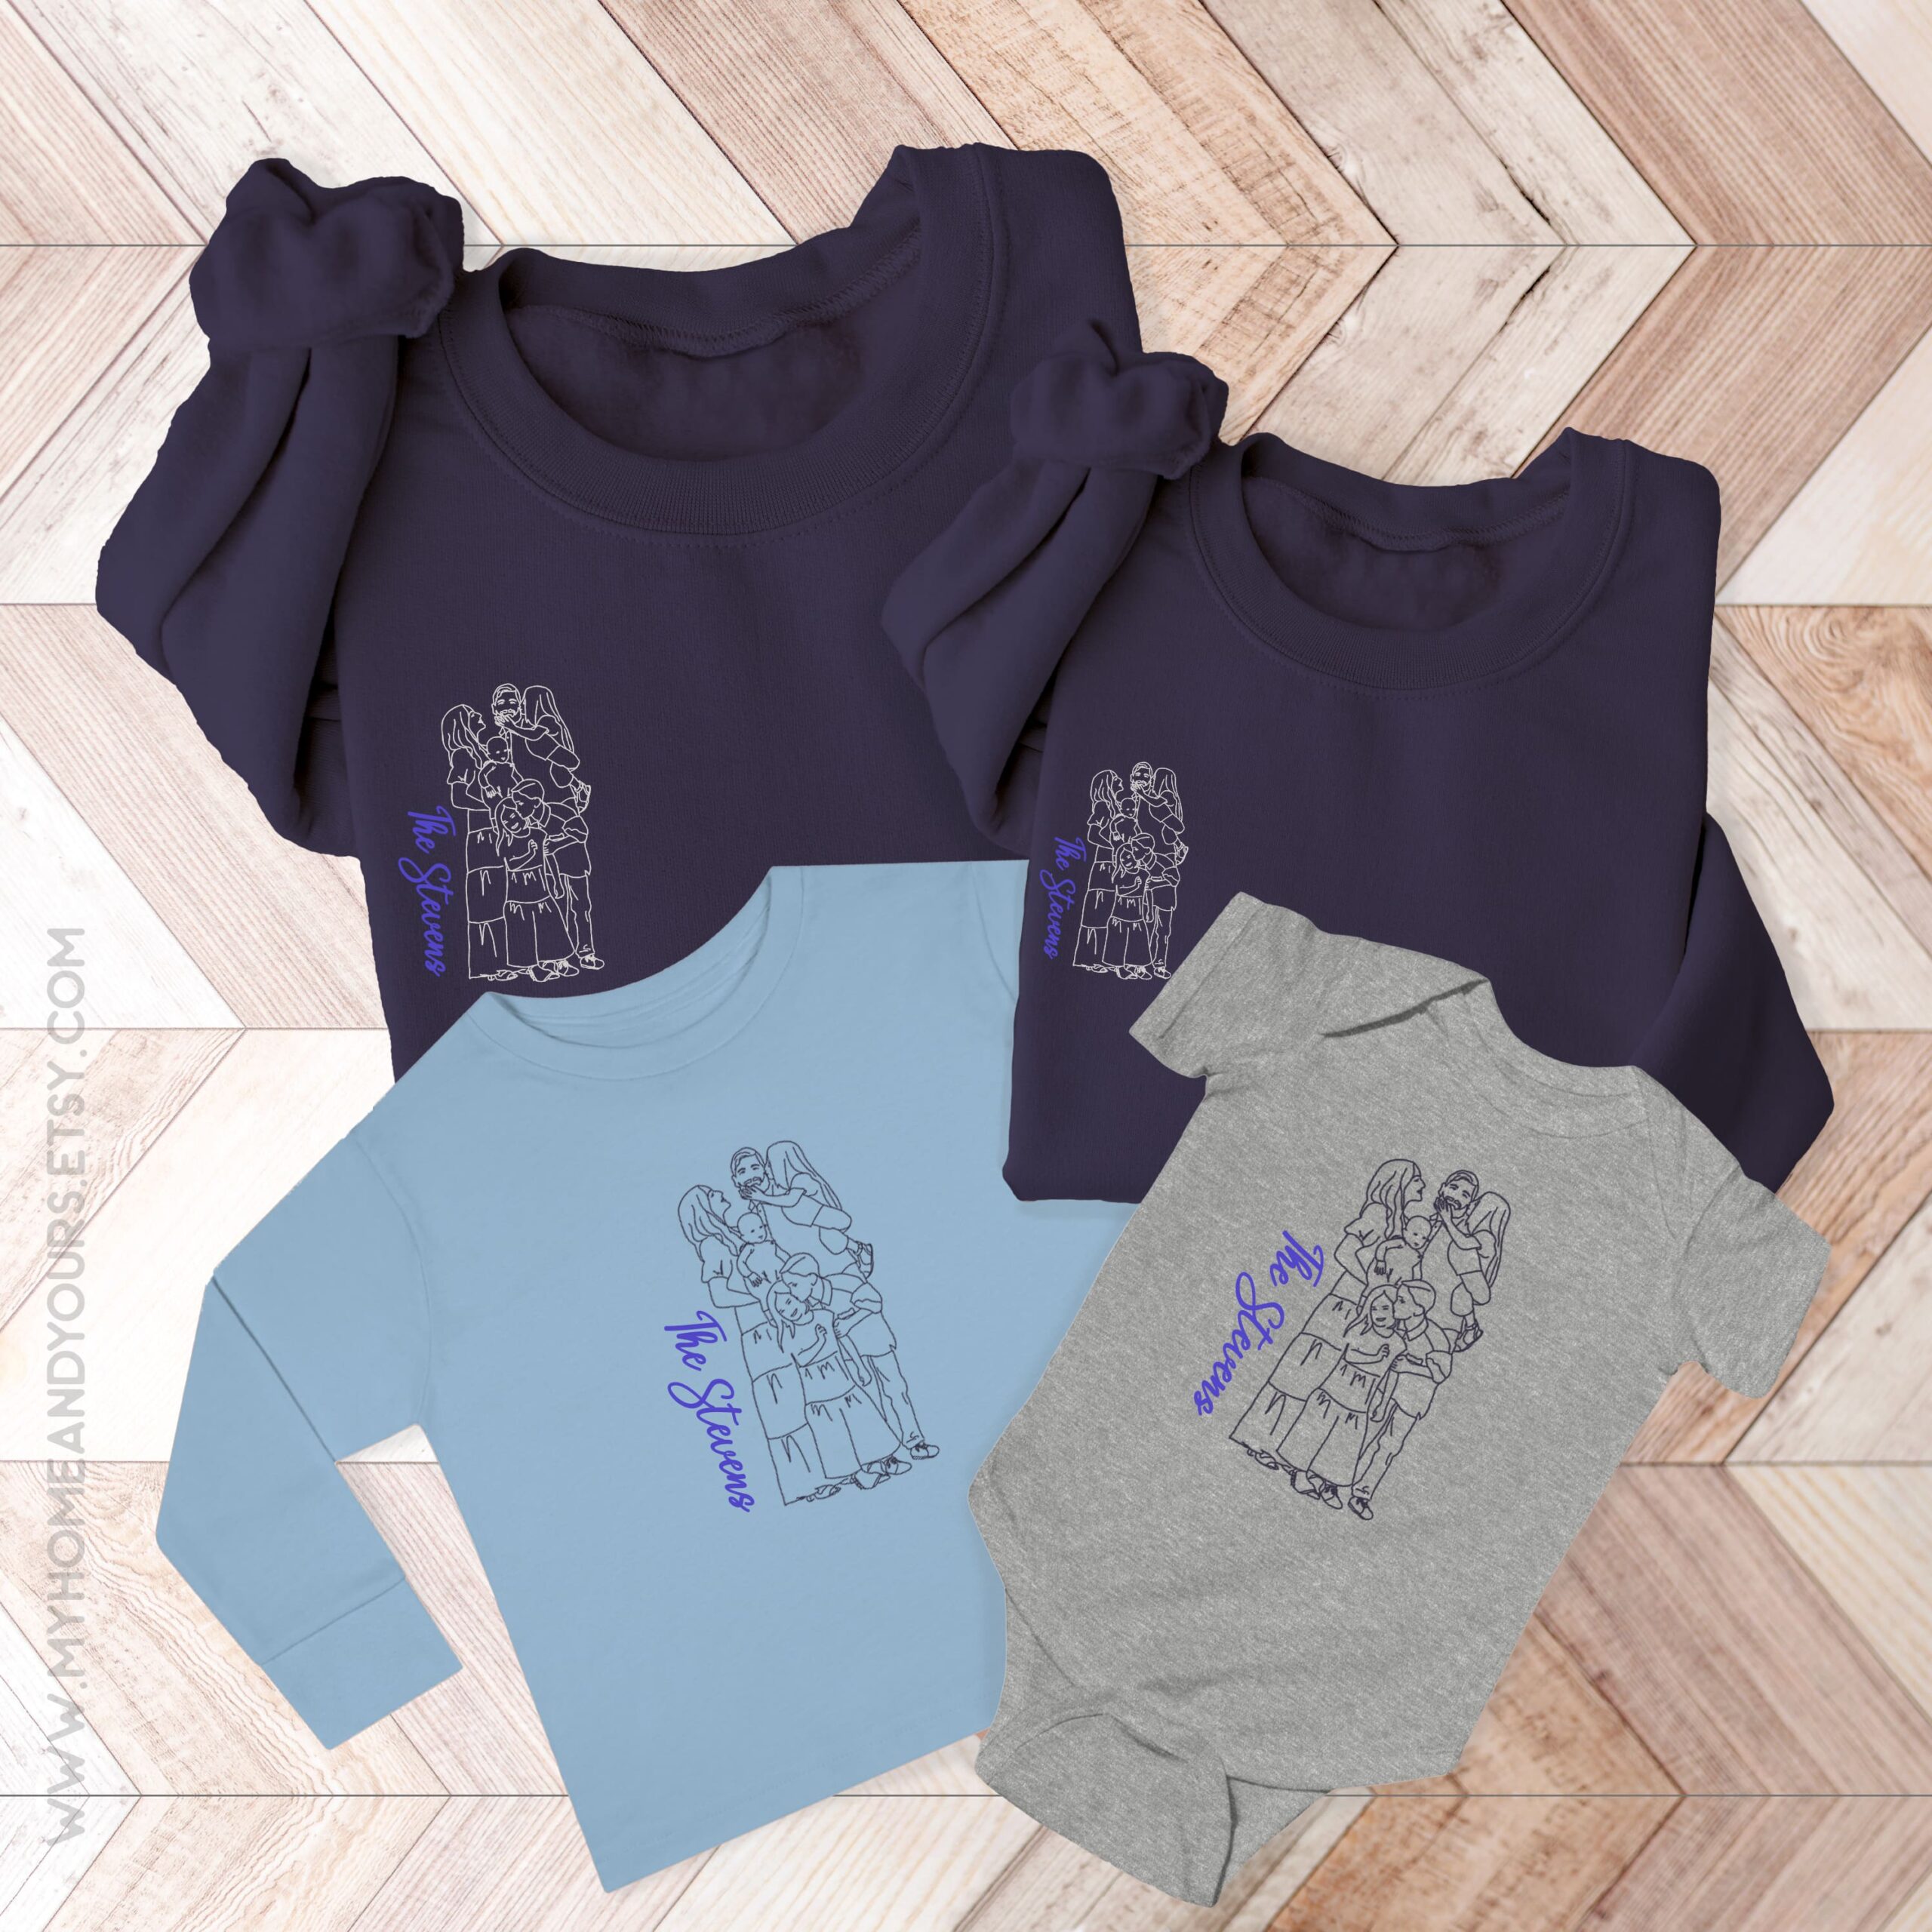 family of 6adult and kids sweatshirts toddler longsleeve and baby body